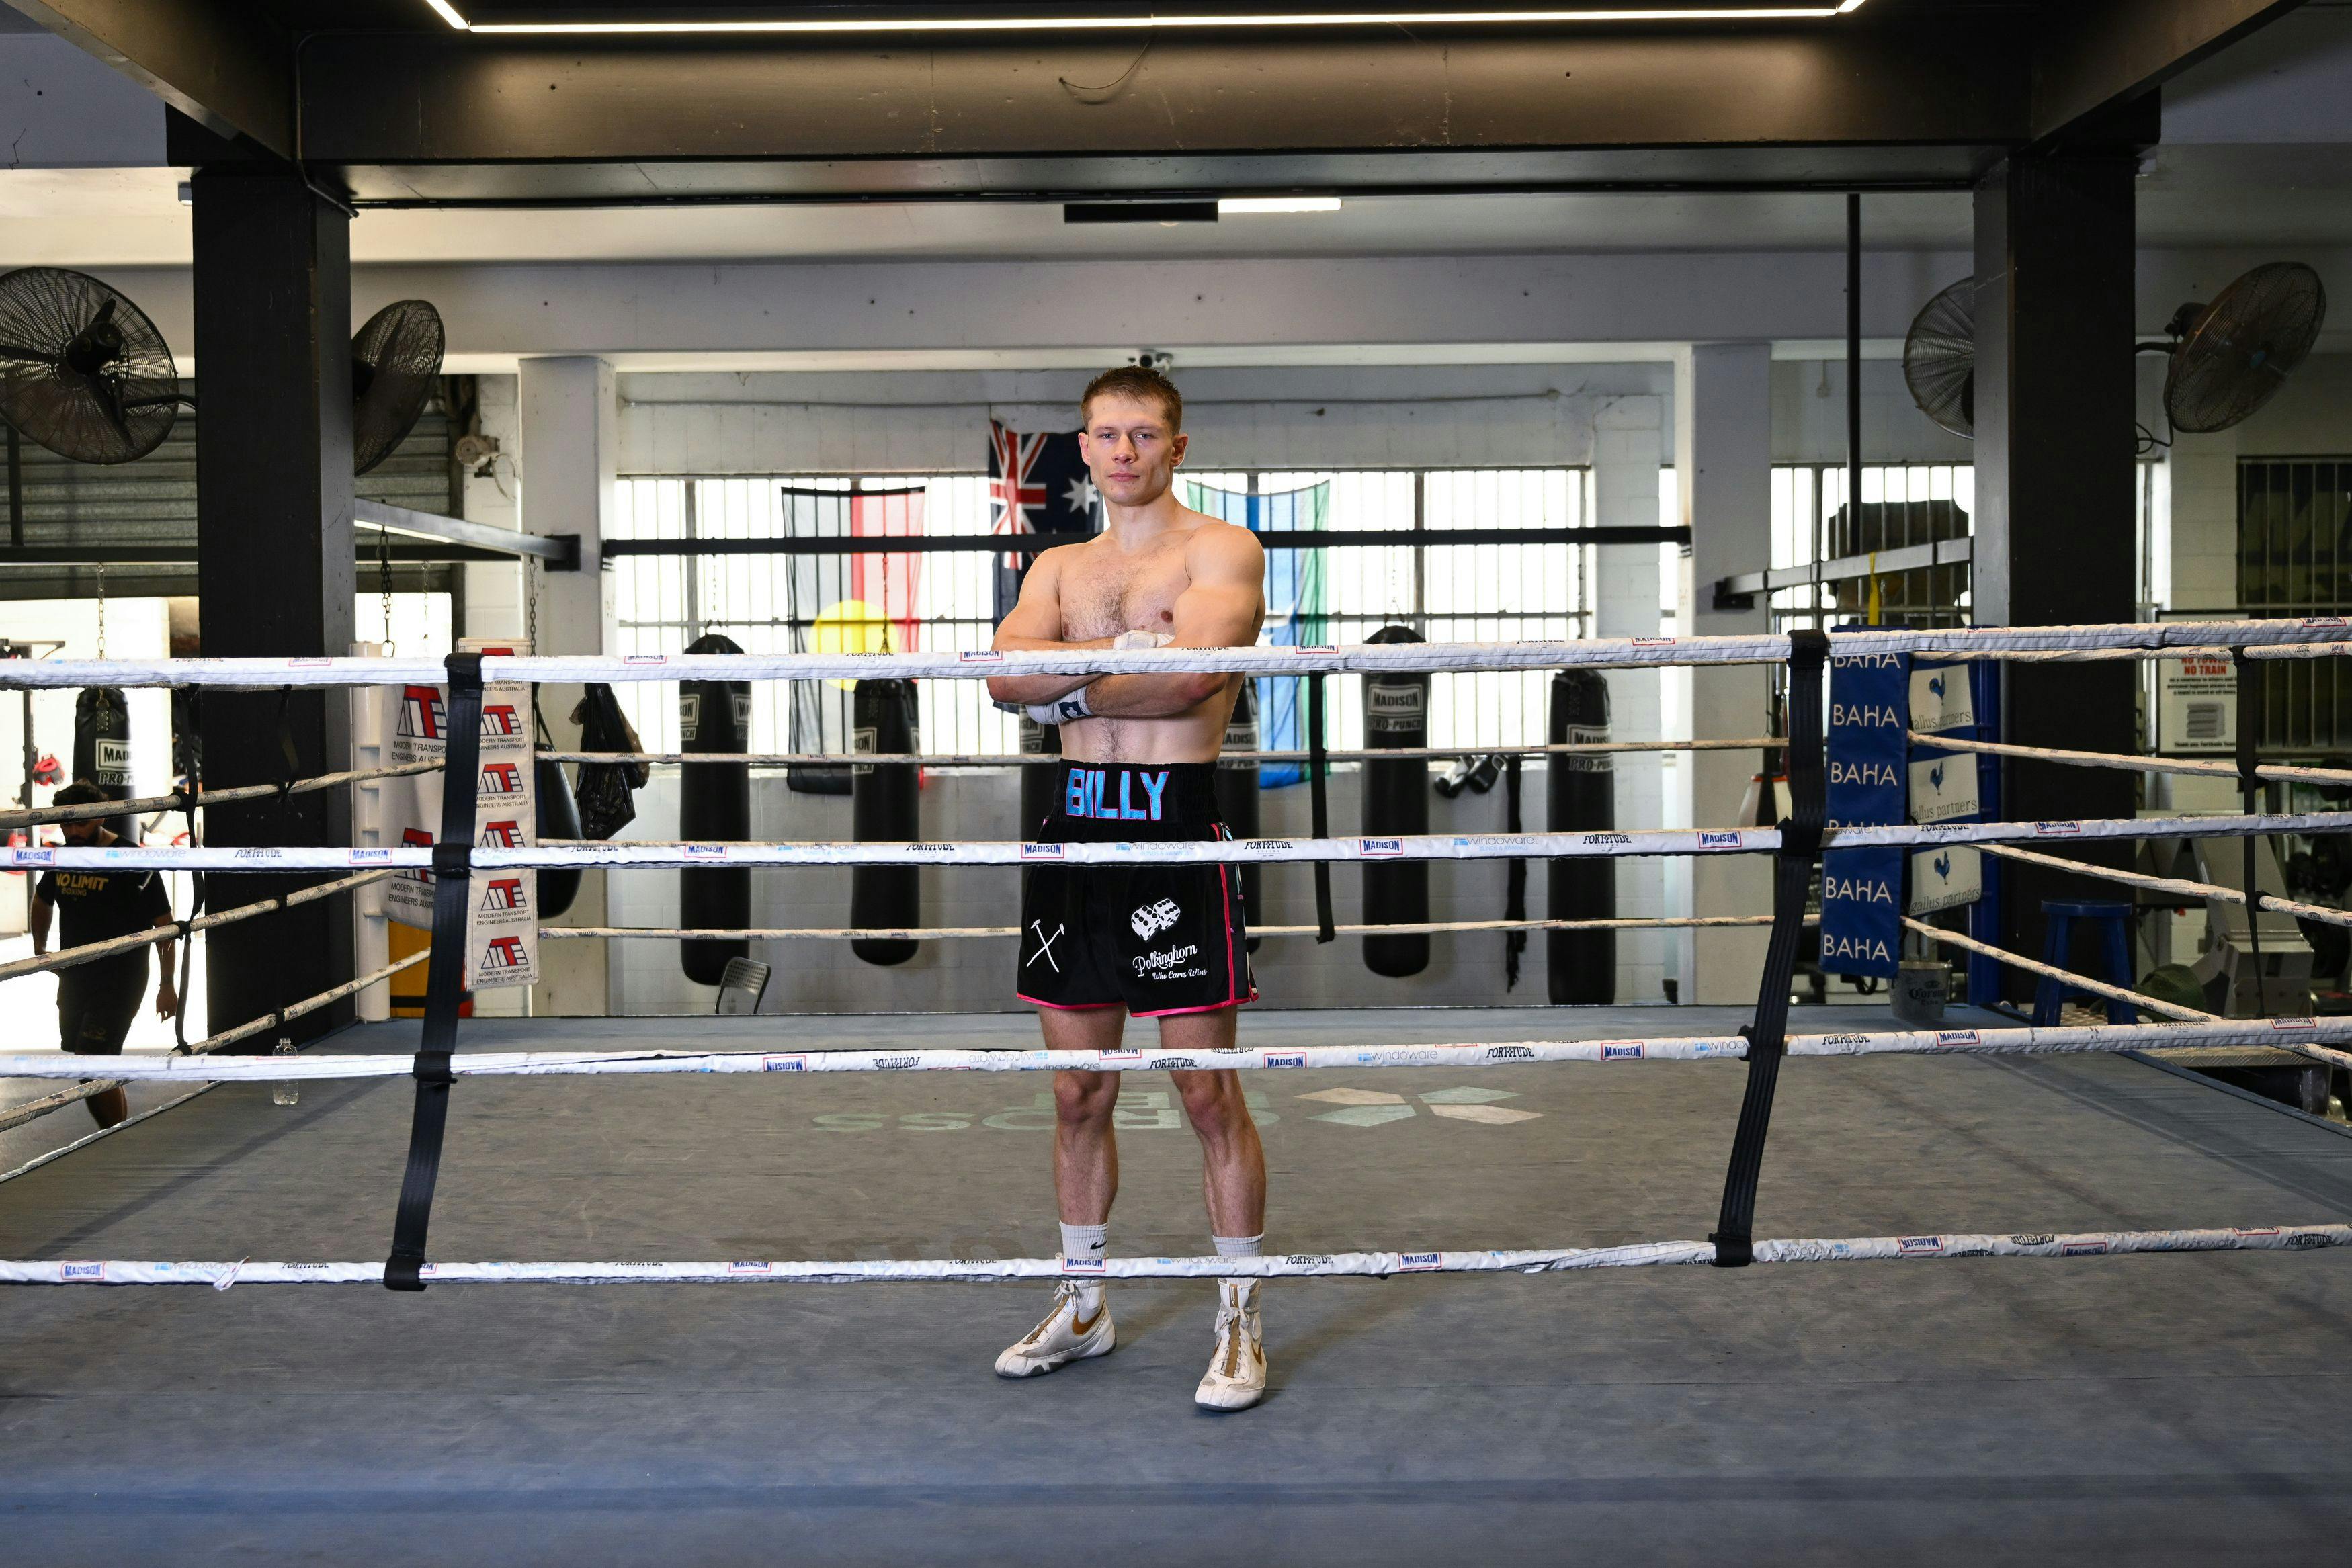 Billy Polkinghorn signs with No Limit Boxing